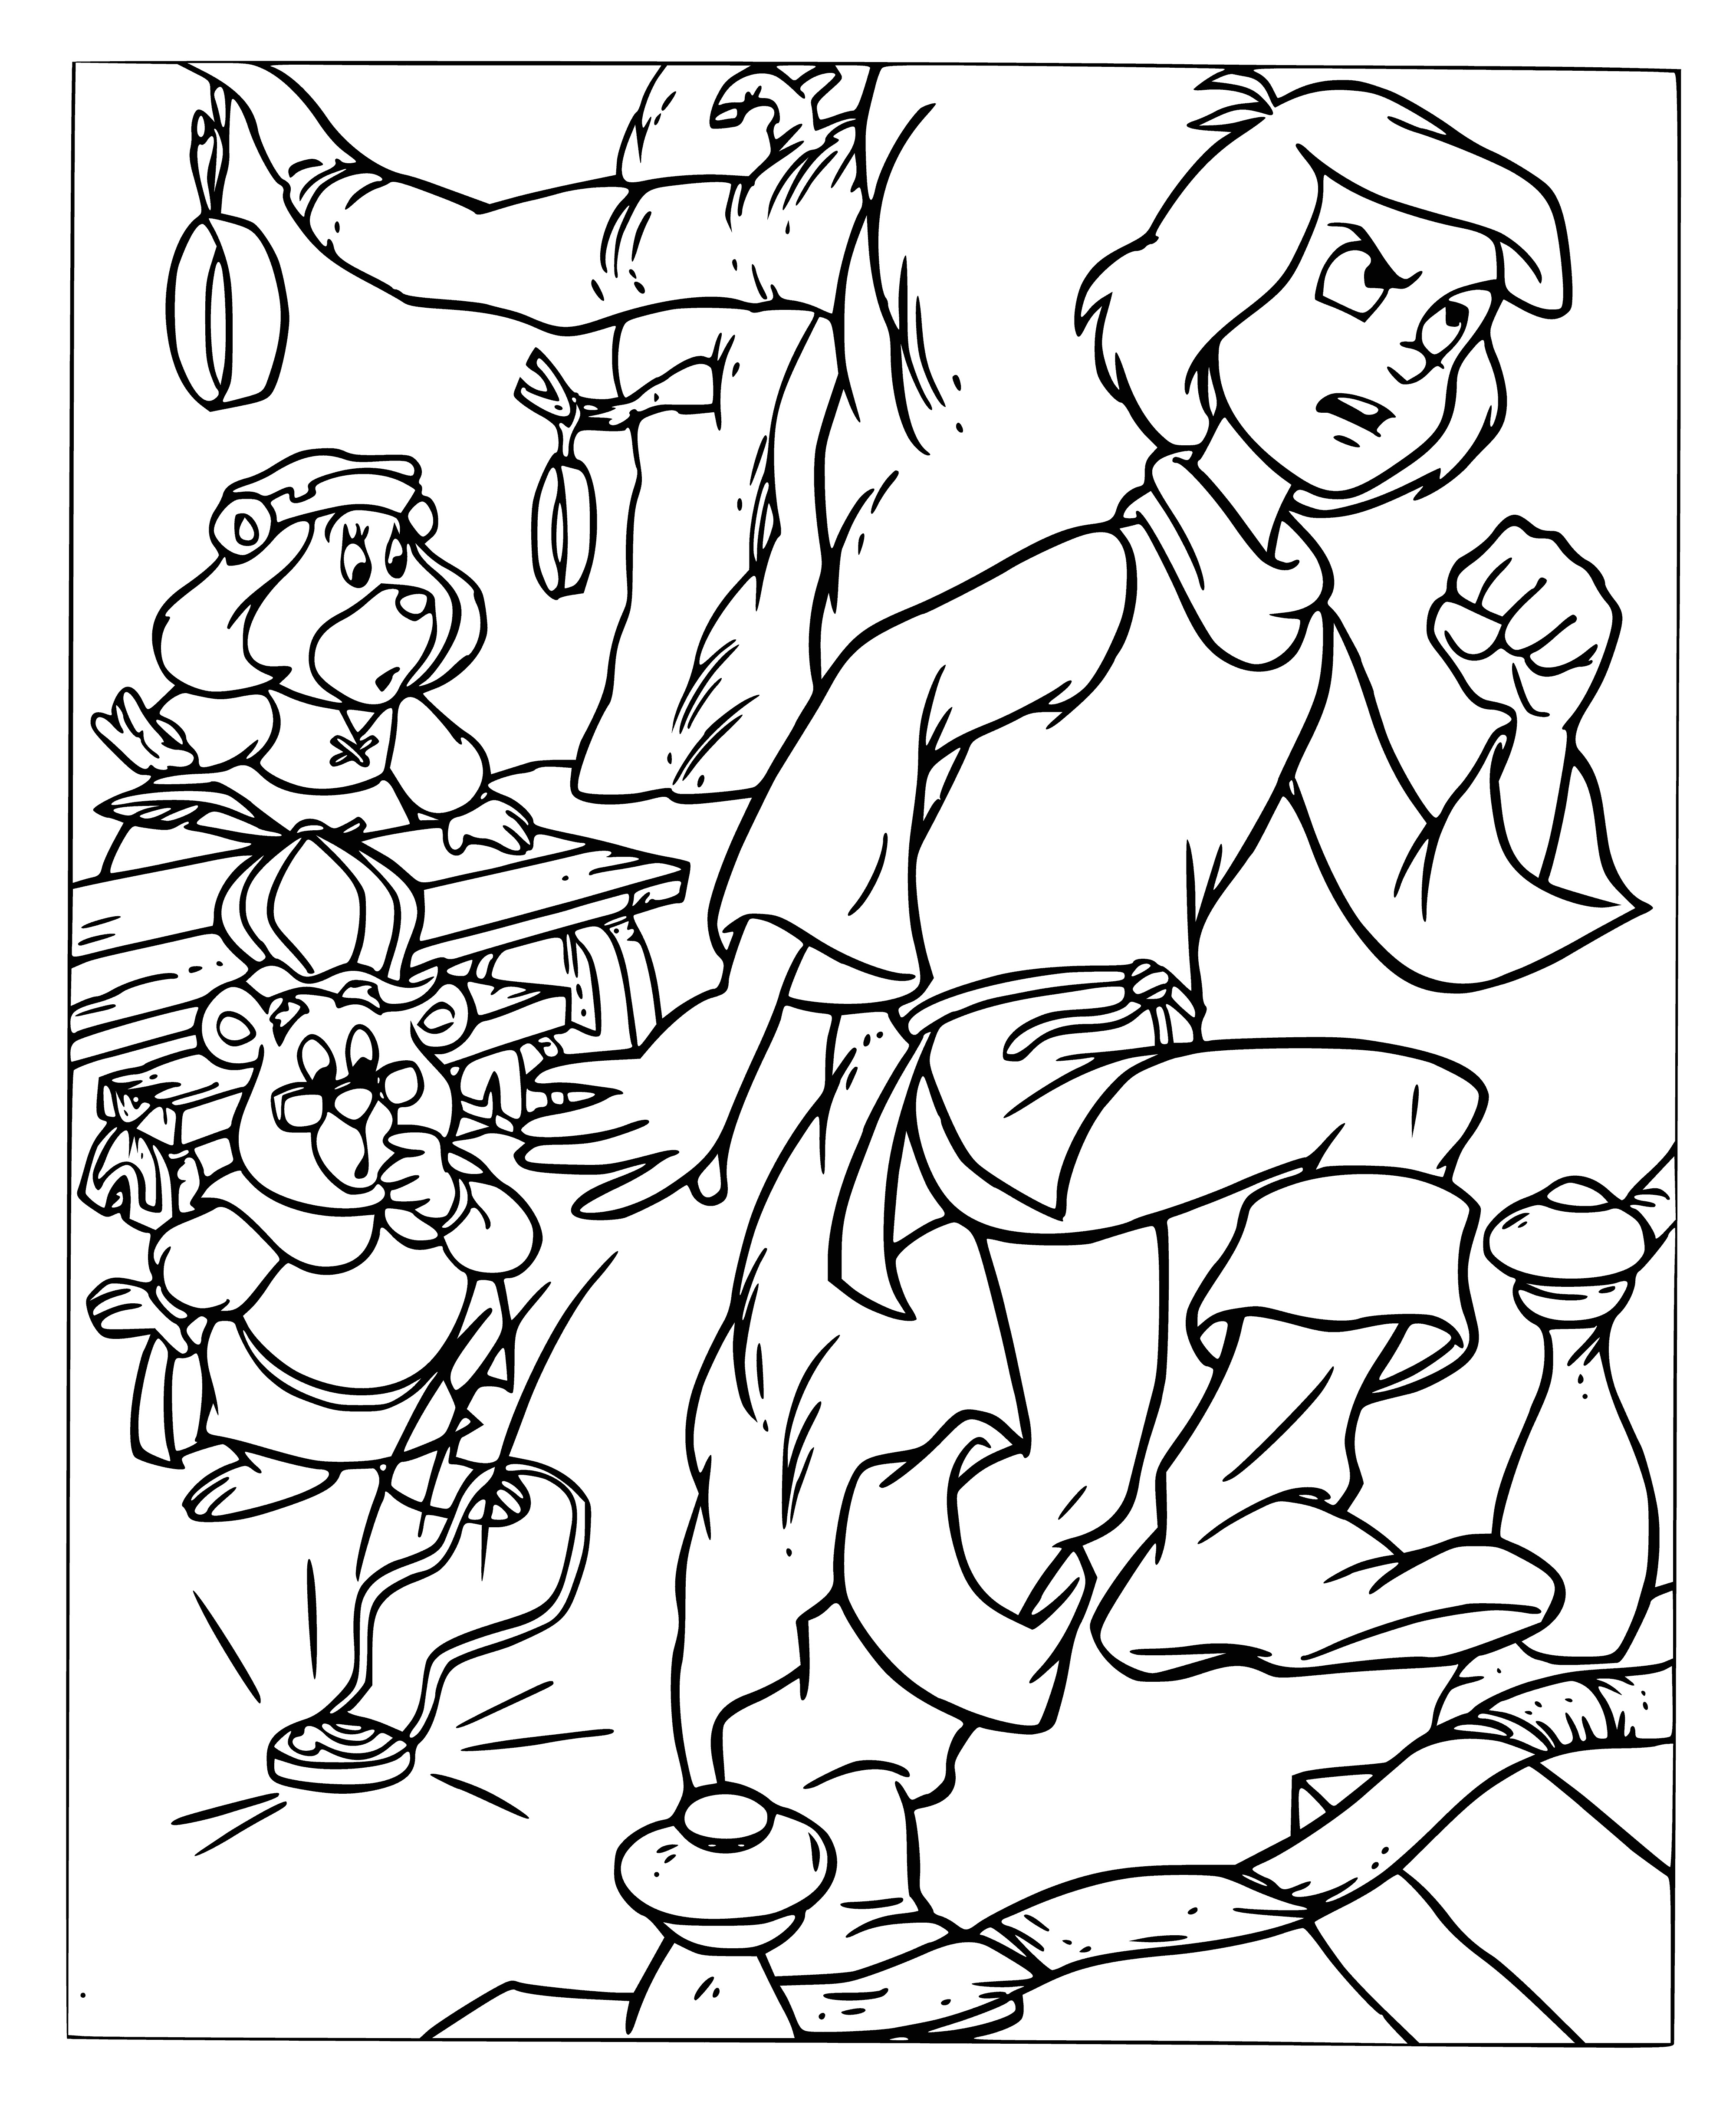 coloring page: A large gummy bear sits in the center, surrounded by five smaller gummy bears of a different color. All the bears have outstretched arms and legs and the large one has a protruding belly.